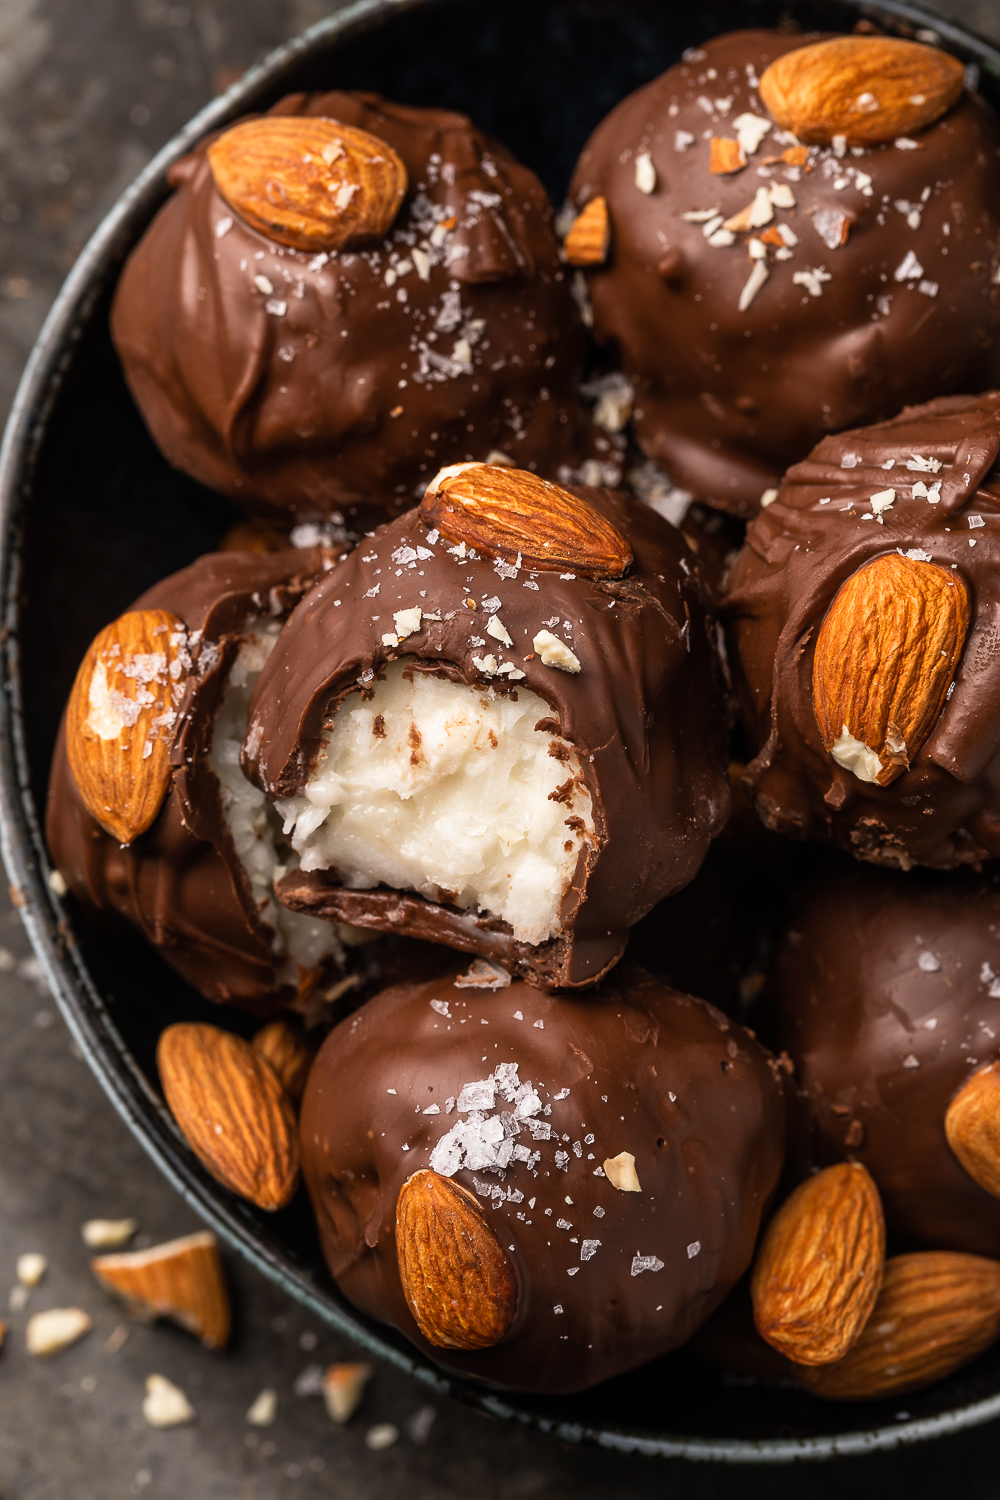 If you like almond joy candy bars, you'll love these almond joy truffles! The coconut mixture is so creamy, it almost tastes like cheesecake, and the rich robe of milk chocolate makes them so decadent! But feel free to dip in dark chocolate for a less sweet treat!